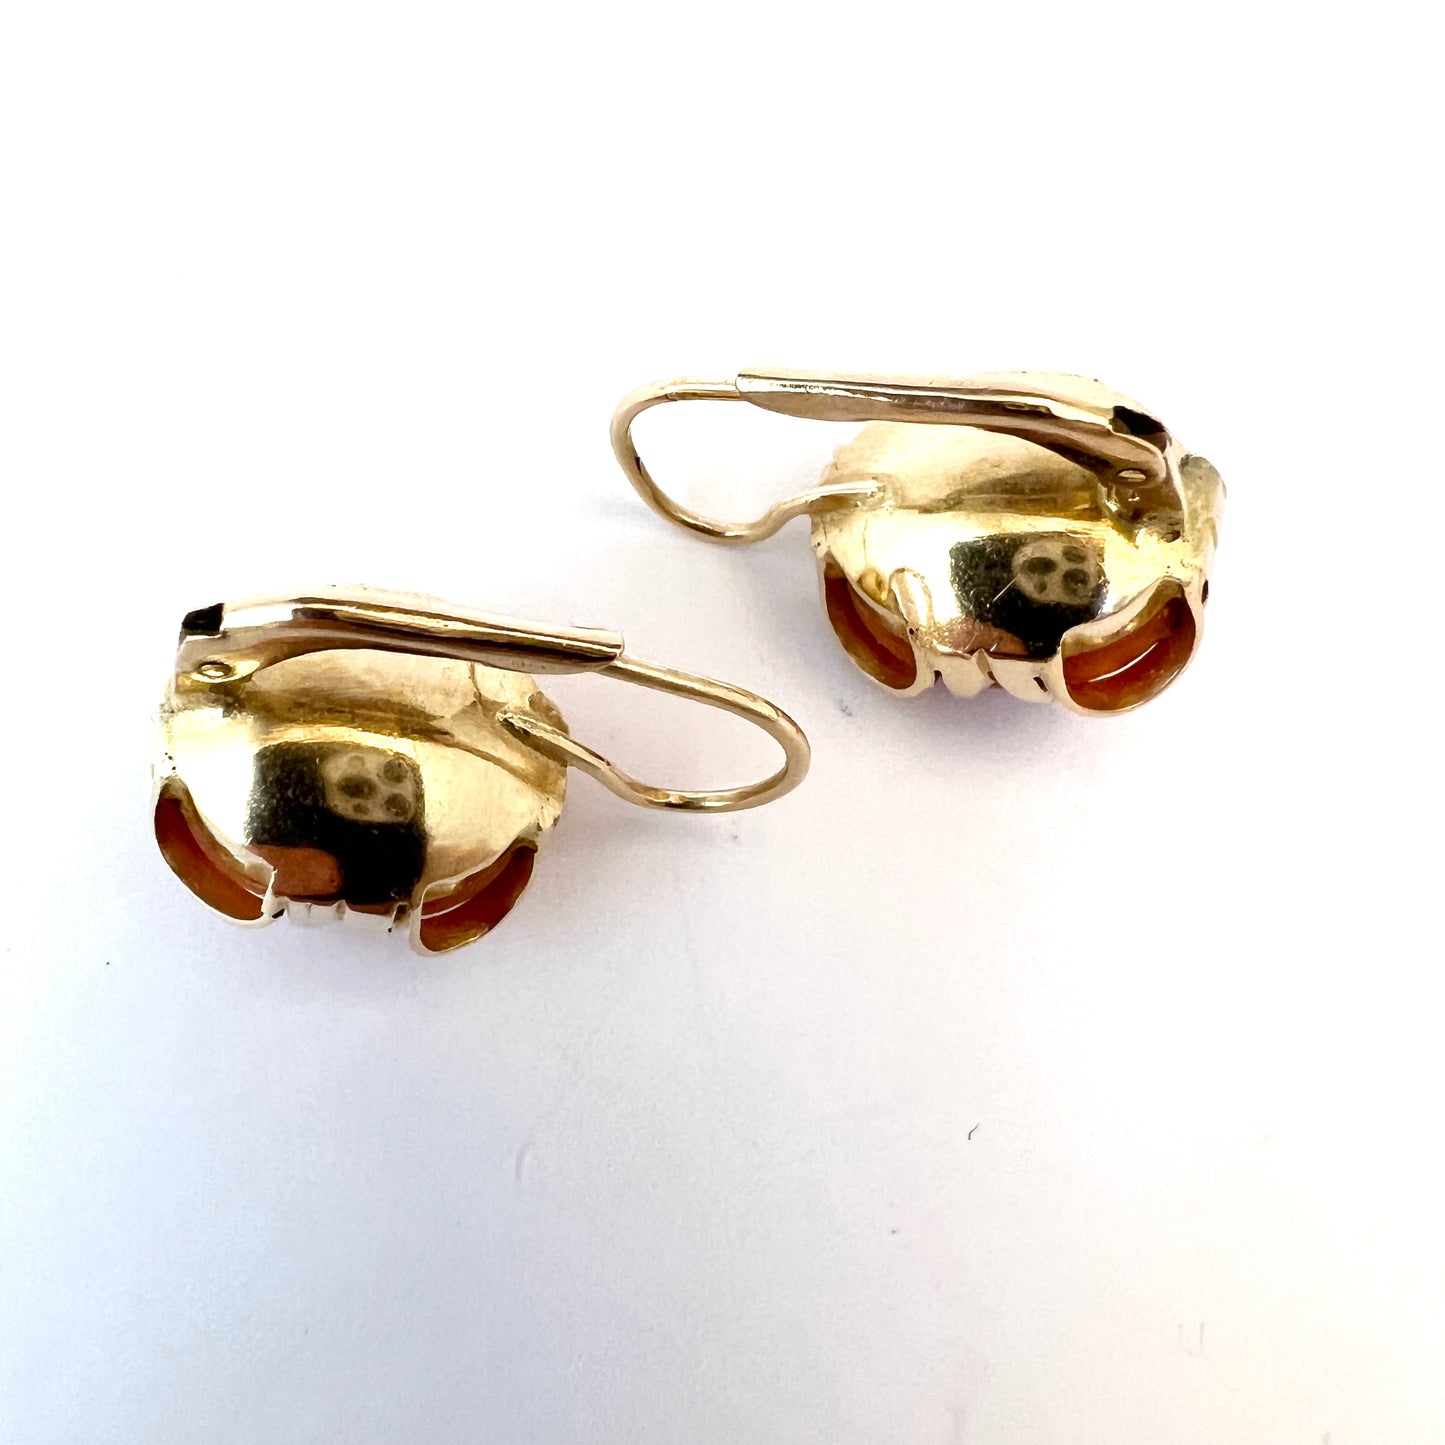 Vintage Mid-century 14k Gold Coral Bold Earrings. Probably Italy. 13.3gram